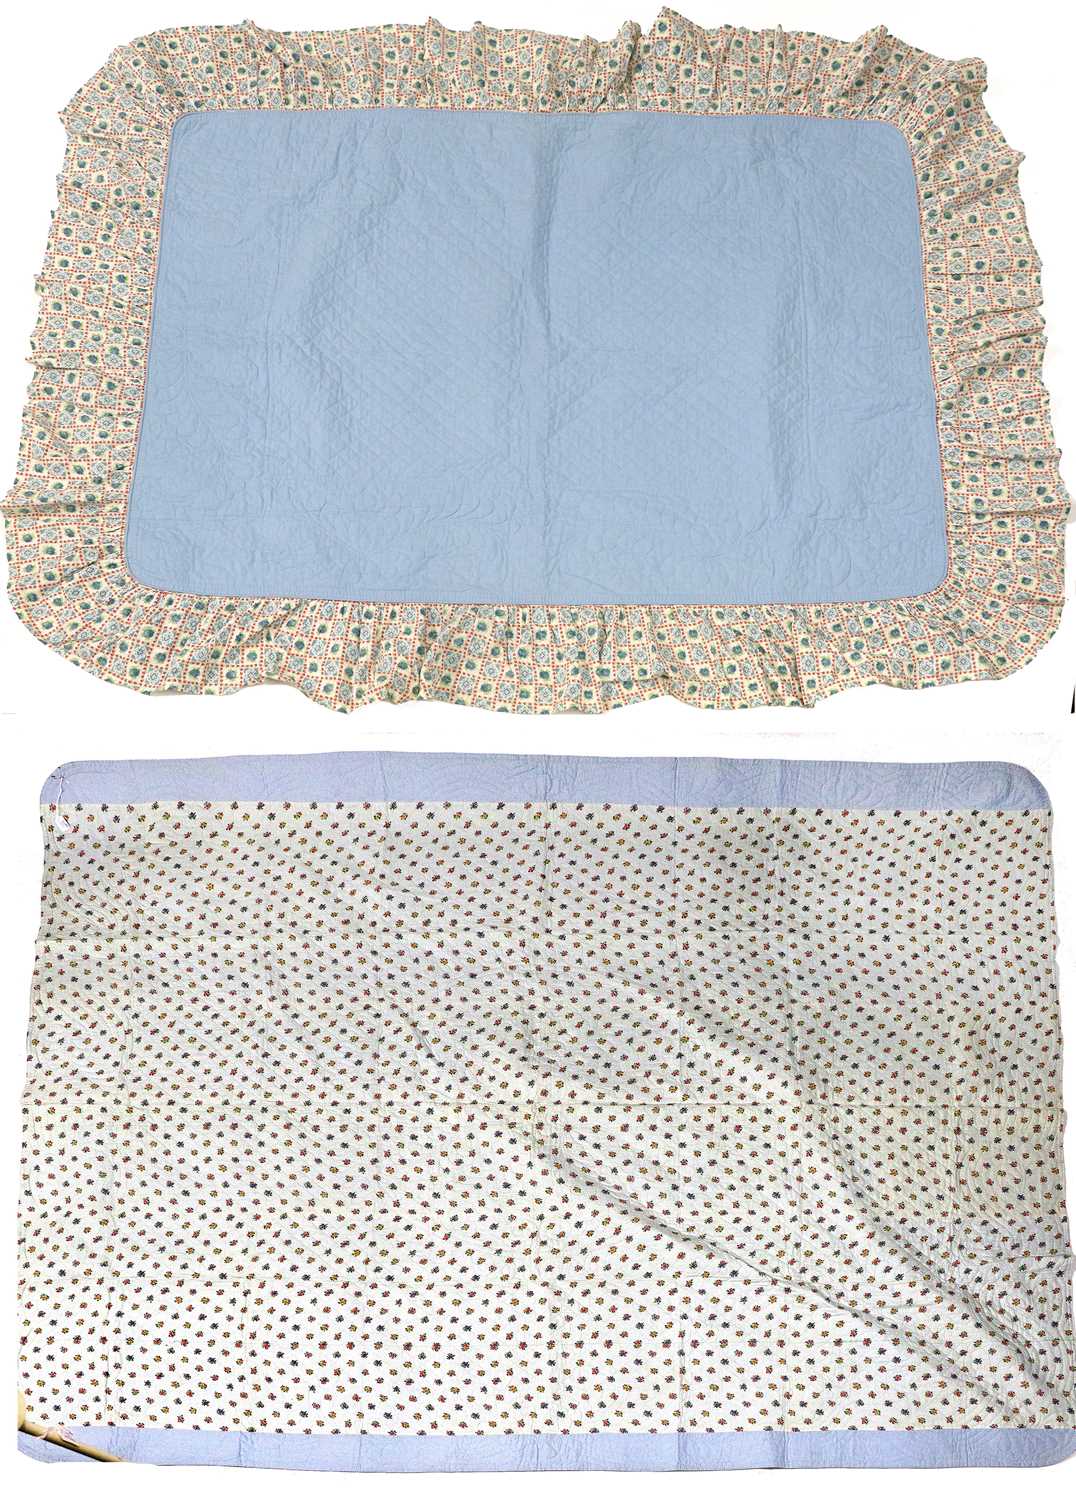 20th Century Reversible Whole Cloth Quilt, with a pale blue cotton to one side and floral sprigged